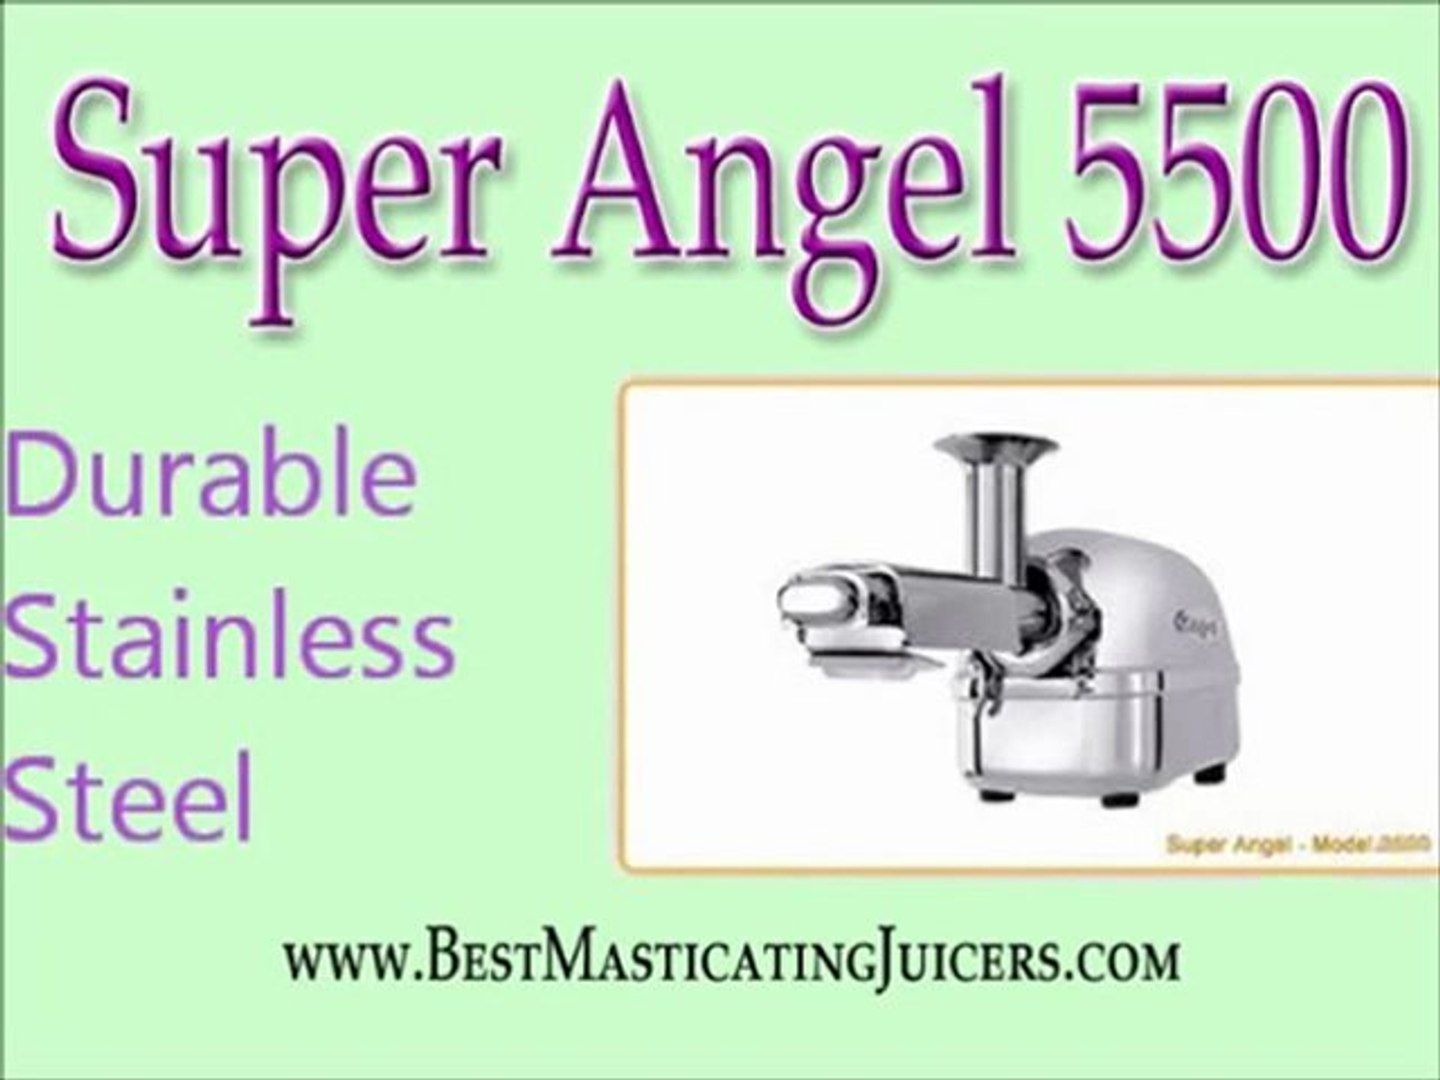 A Real Super Angel 5500 Video Assessment - video dailymotion